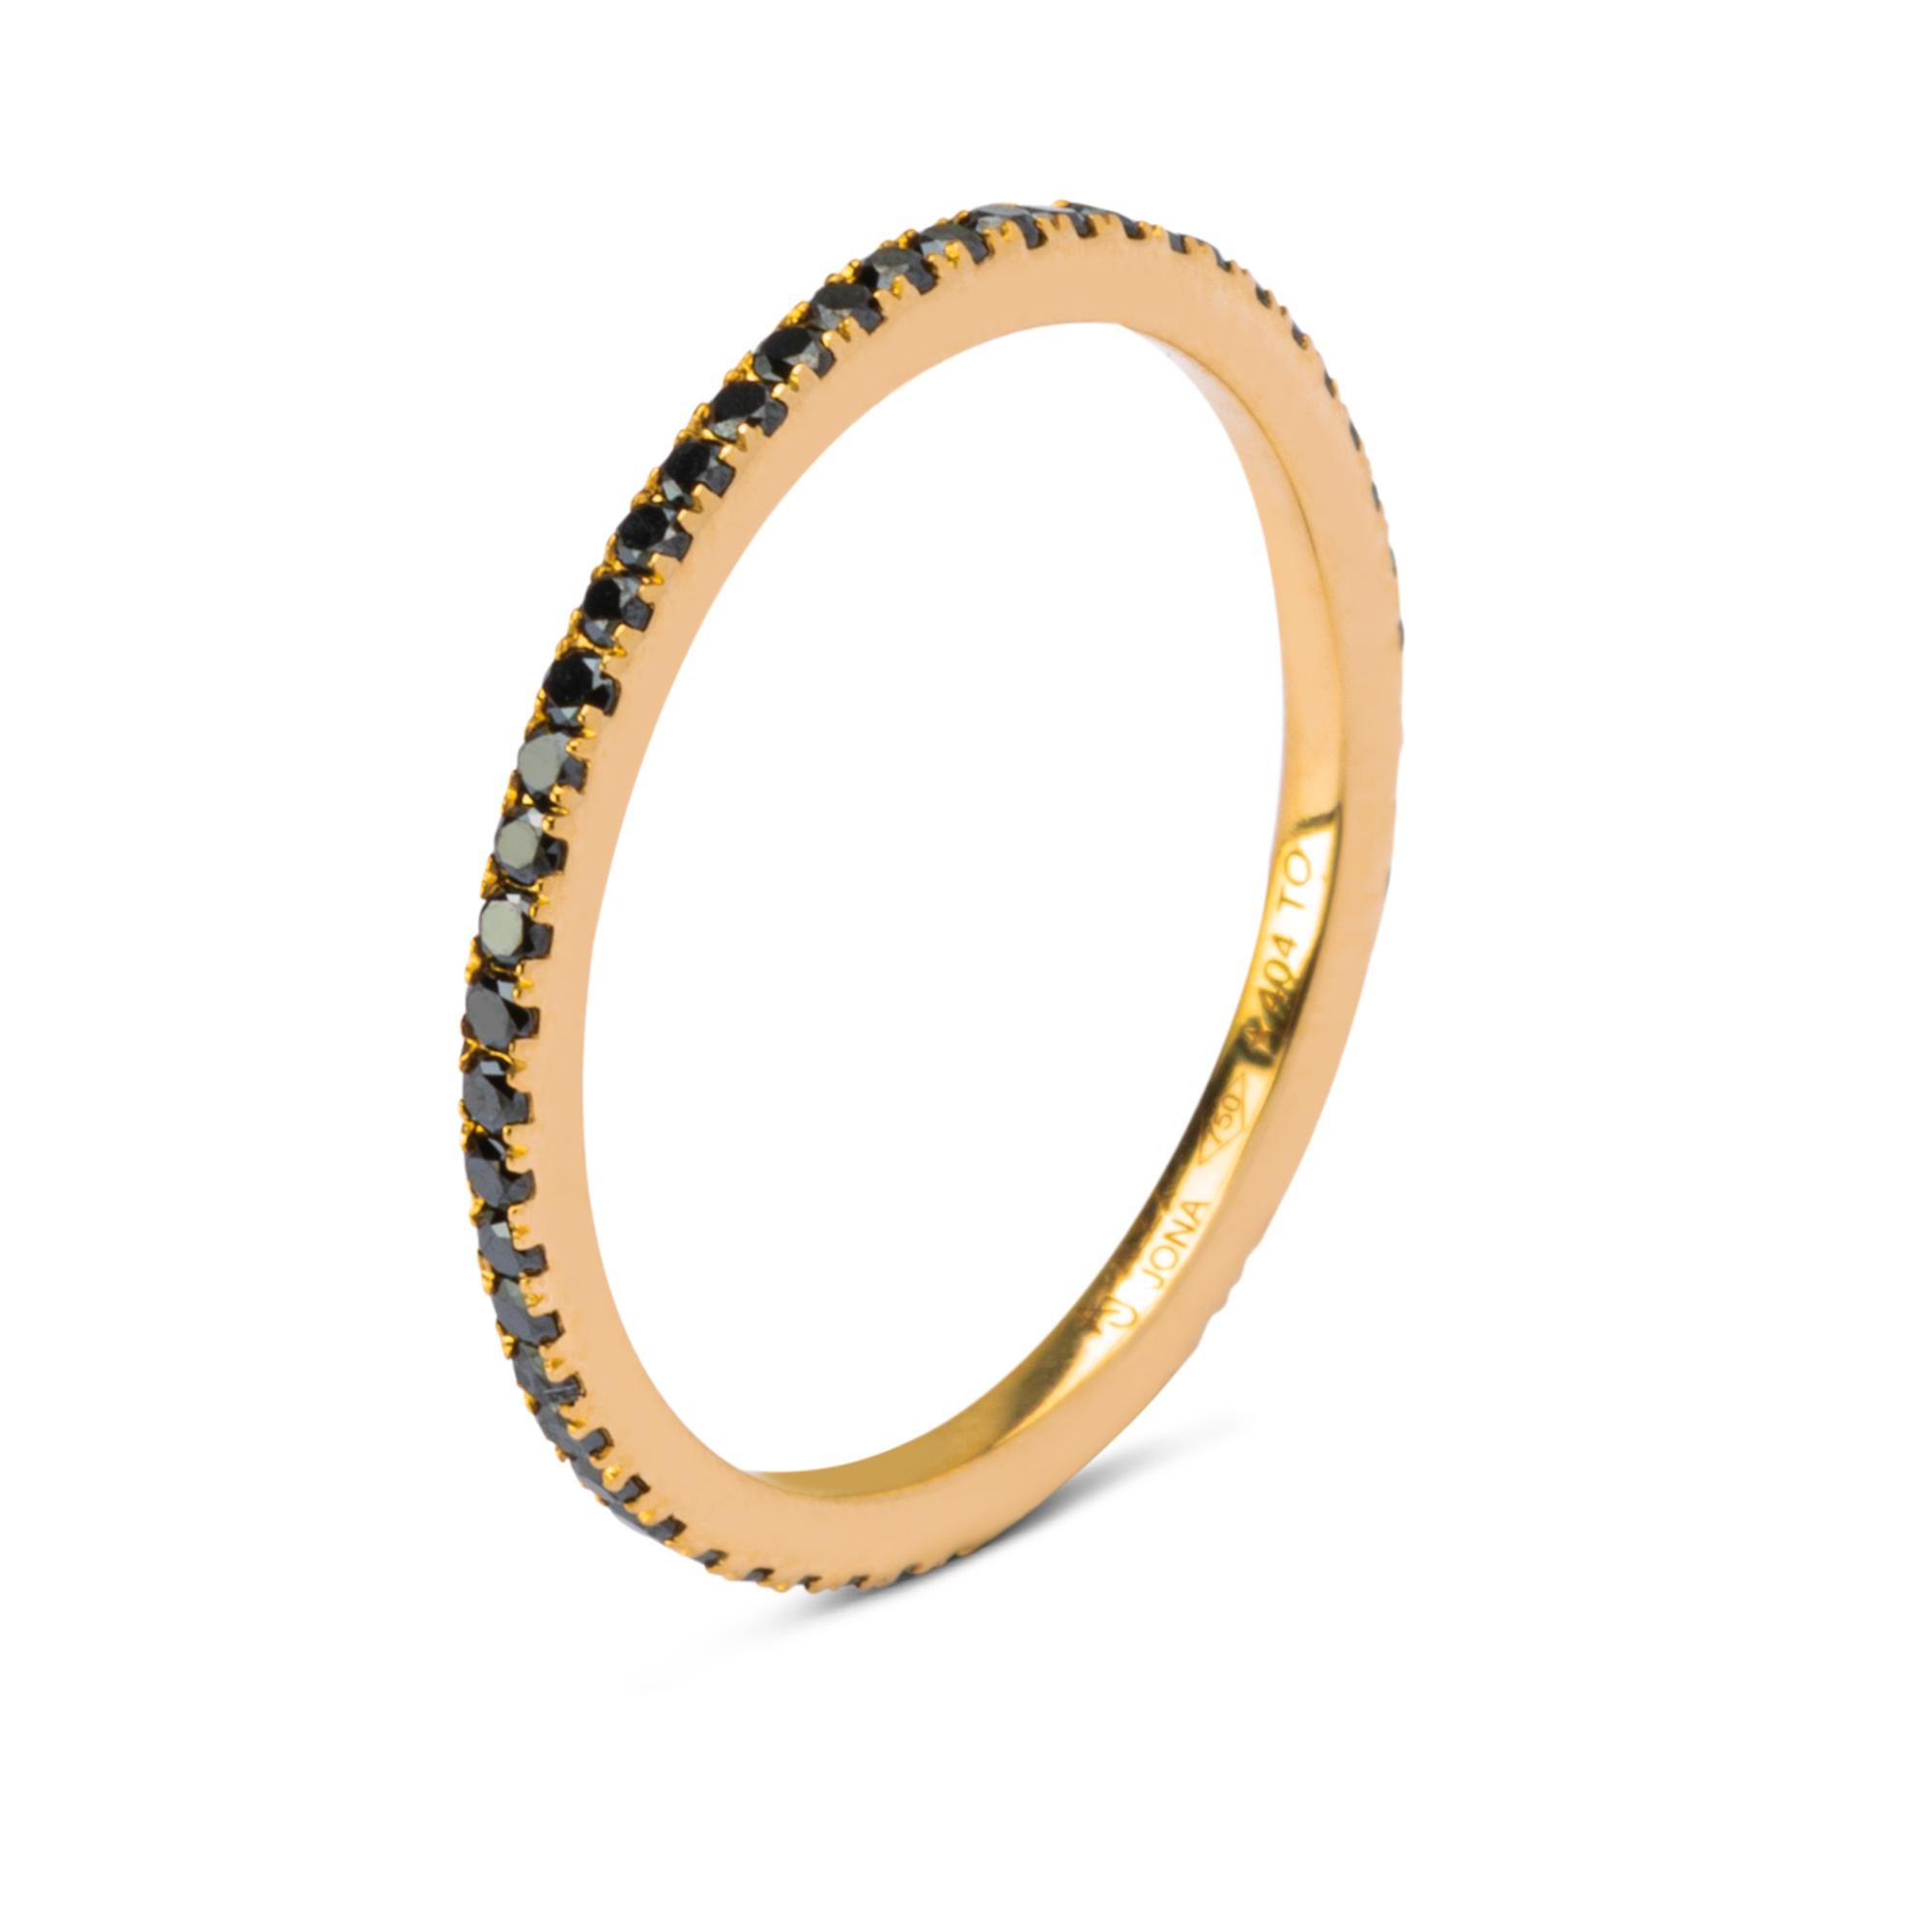 Alex Jona design collection, hand crafted in Italy, 18 karat yellow gold eternity band ring, set with 52 black diamonds for a total weight of 0.32 carats. 
Ring size US. 6.2, EU 12/ 52mm, can be size to any specification or made to order in any